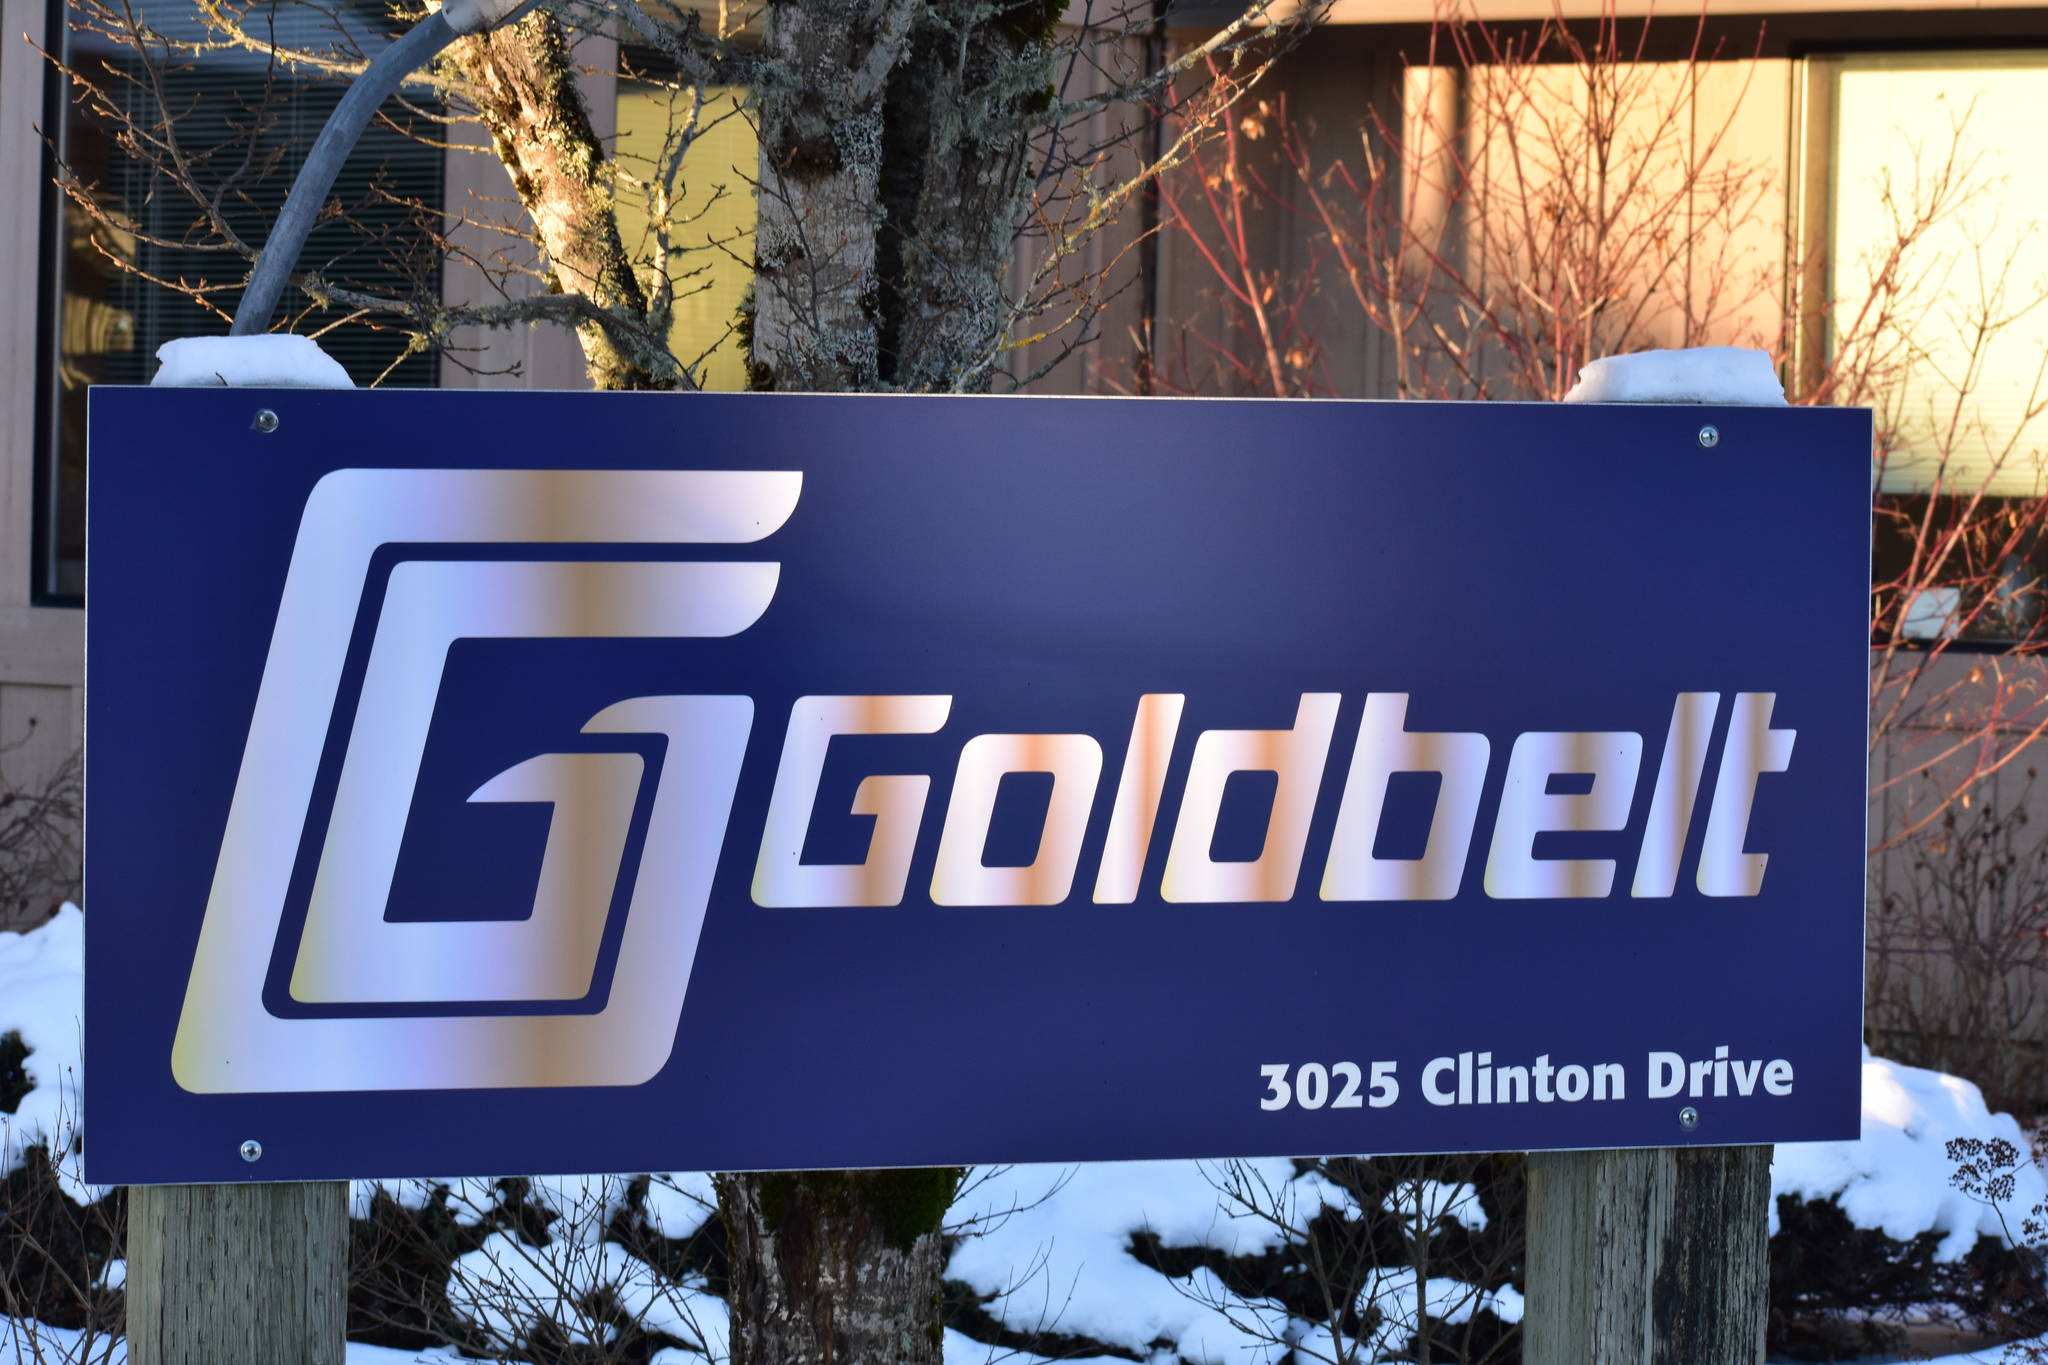 After criticism, Goldbelt Inc. reduces pay raise for board members